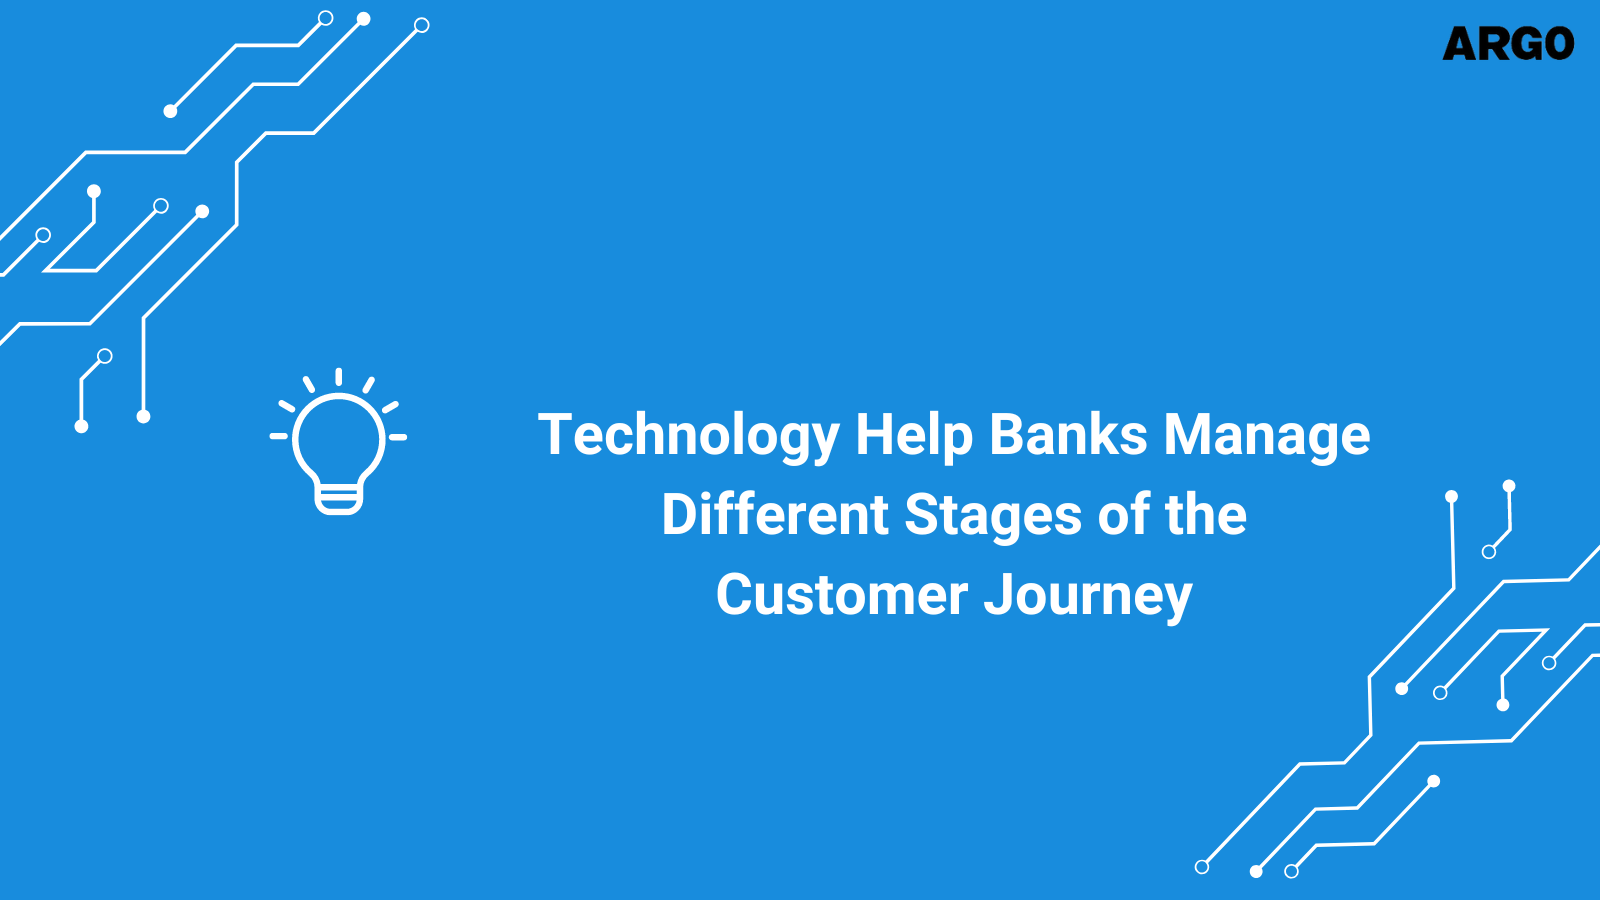 Technology Help Banks Manage Different Stages of the Customer Journey